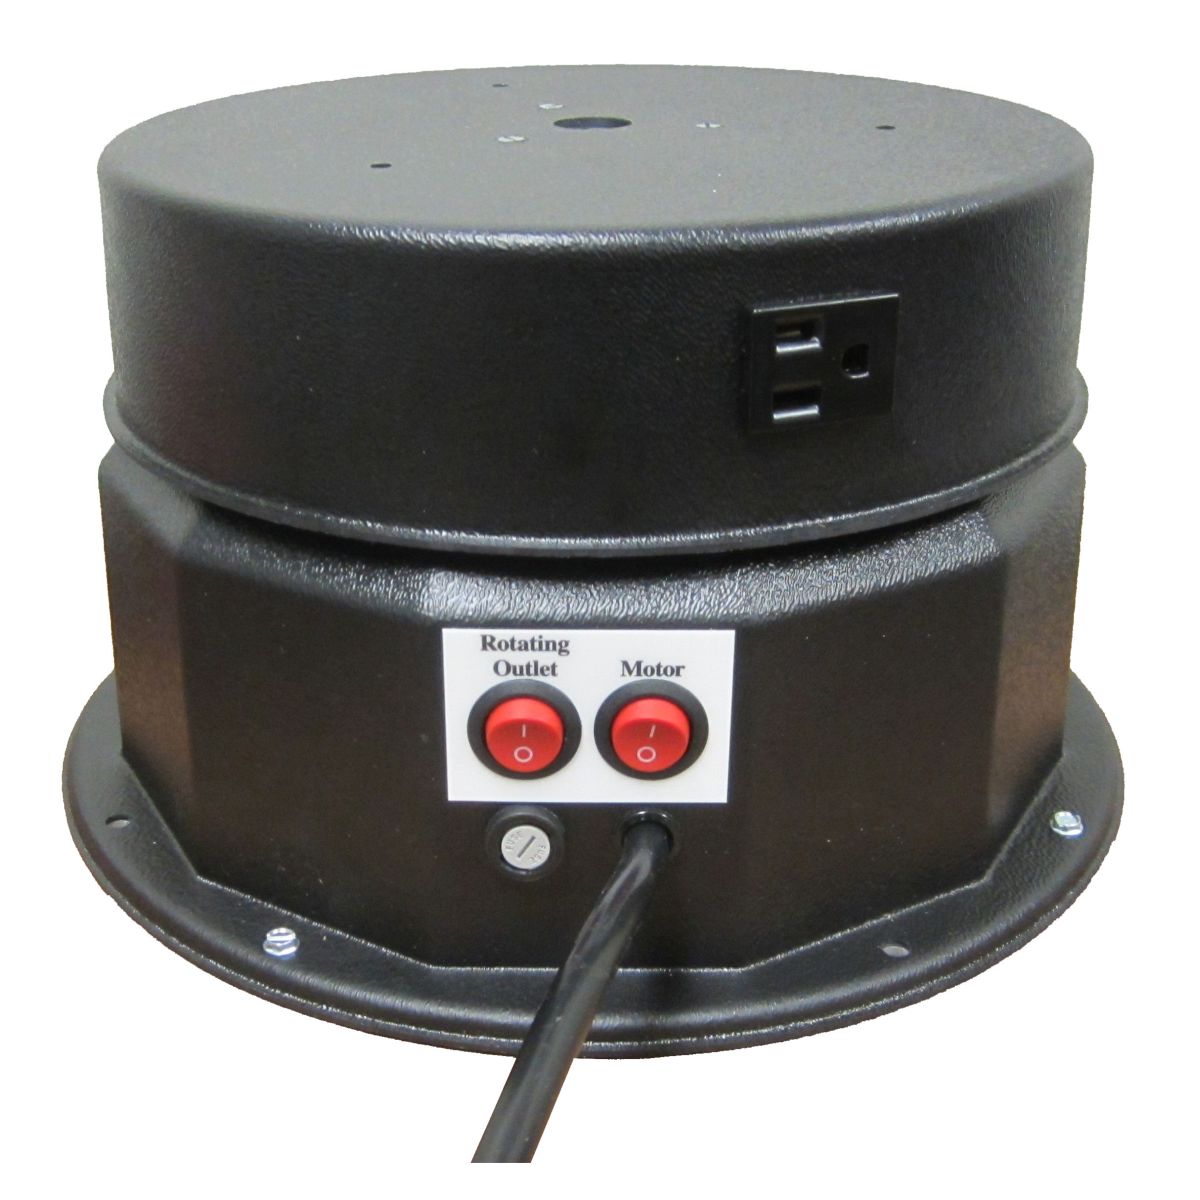 Motorized Turntable - 200 Pound Cap. - Electric Outlet